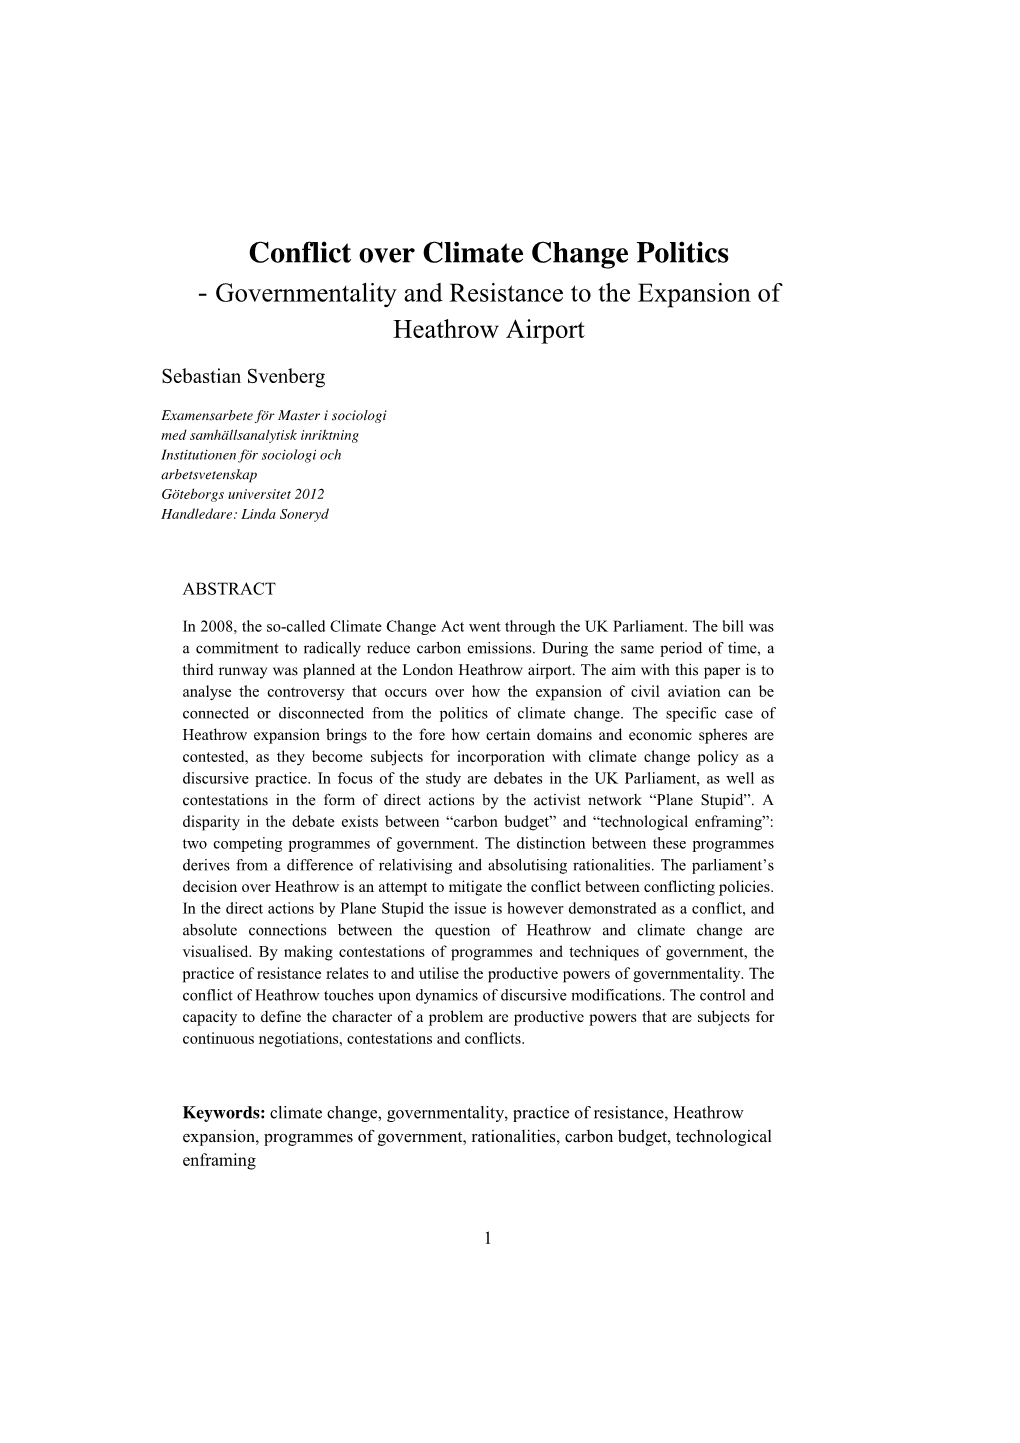 Conflict Over Climate Change Politics - Governmentality and Resistance to the Expansion of Heathrow Airport